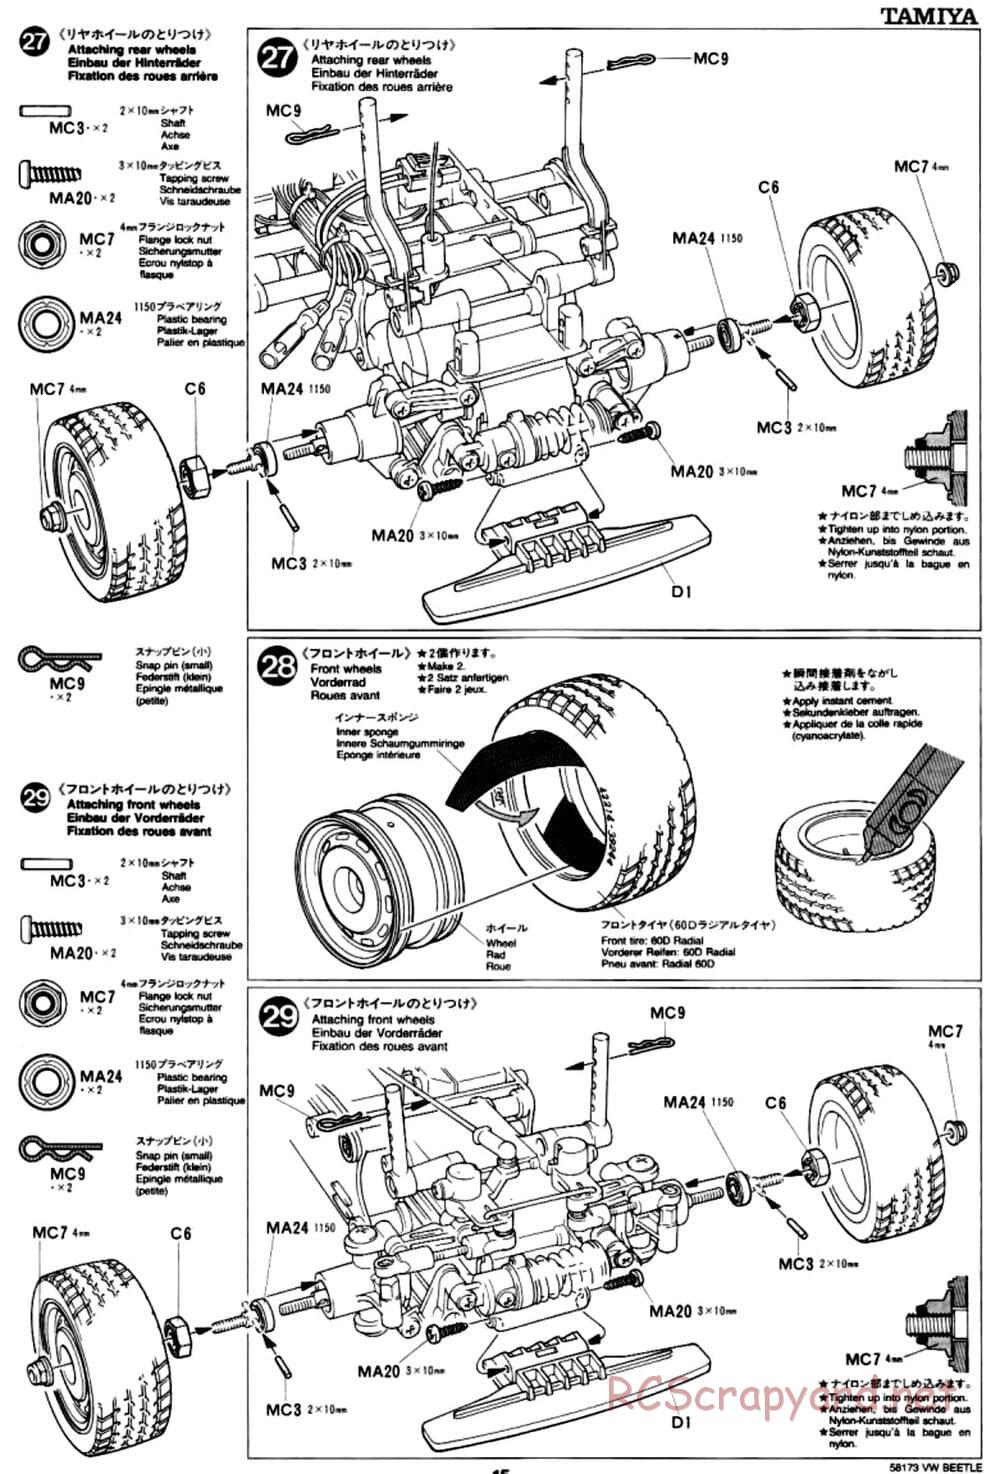 Tamiya - Volkswagen Beetle - M02L Chassis - Manual - Page 15